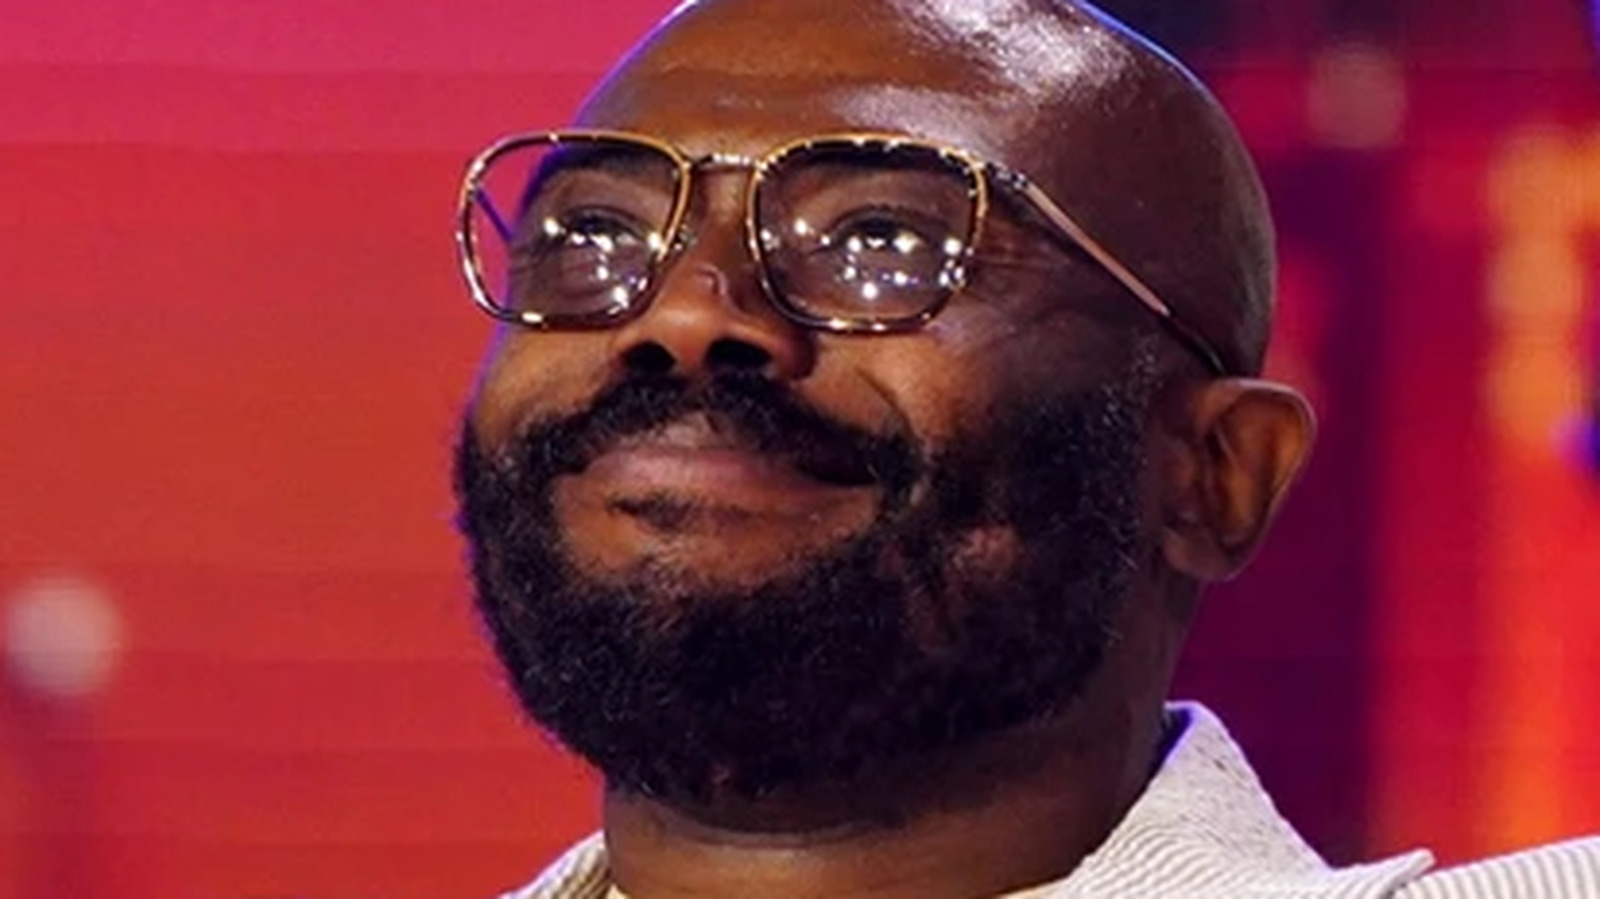 Stokely Hathaway Loves Black Culture And Is Working To Blend It Into AEW